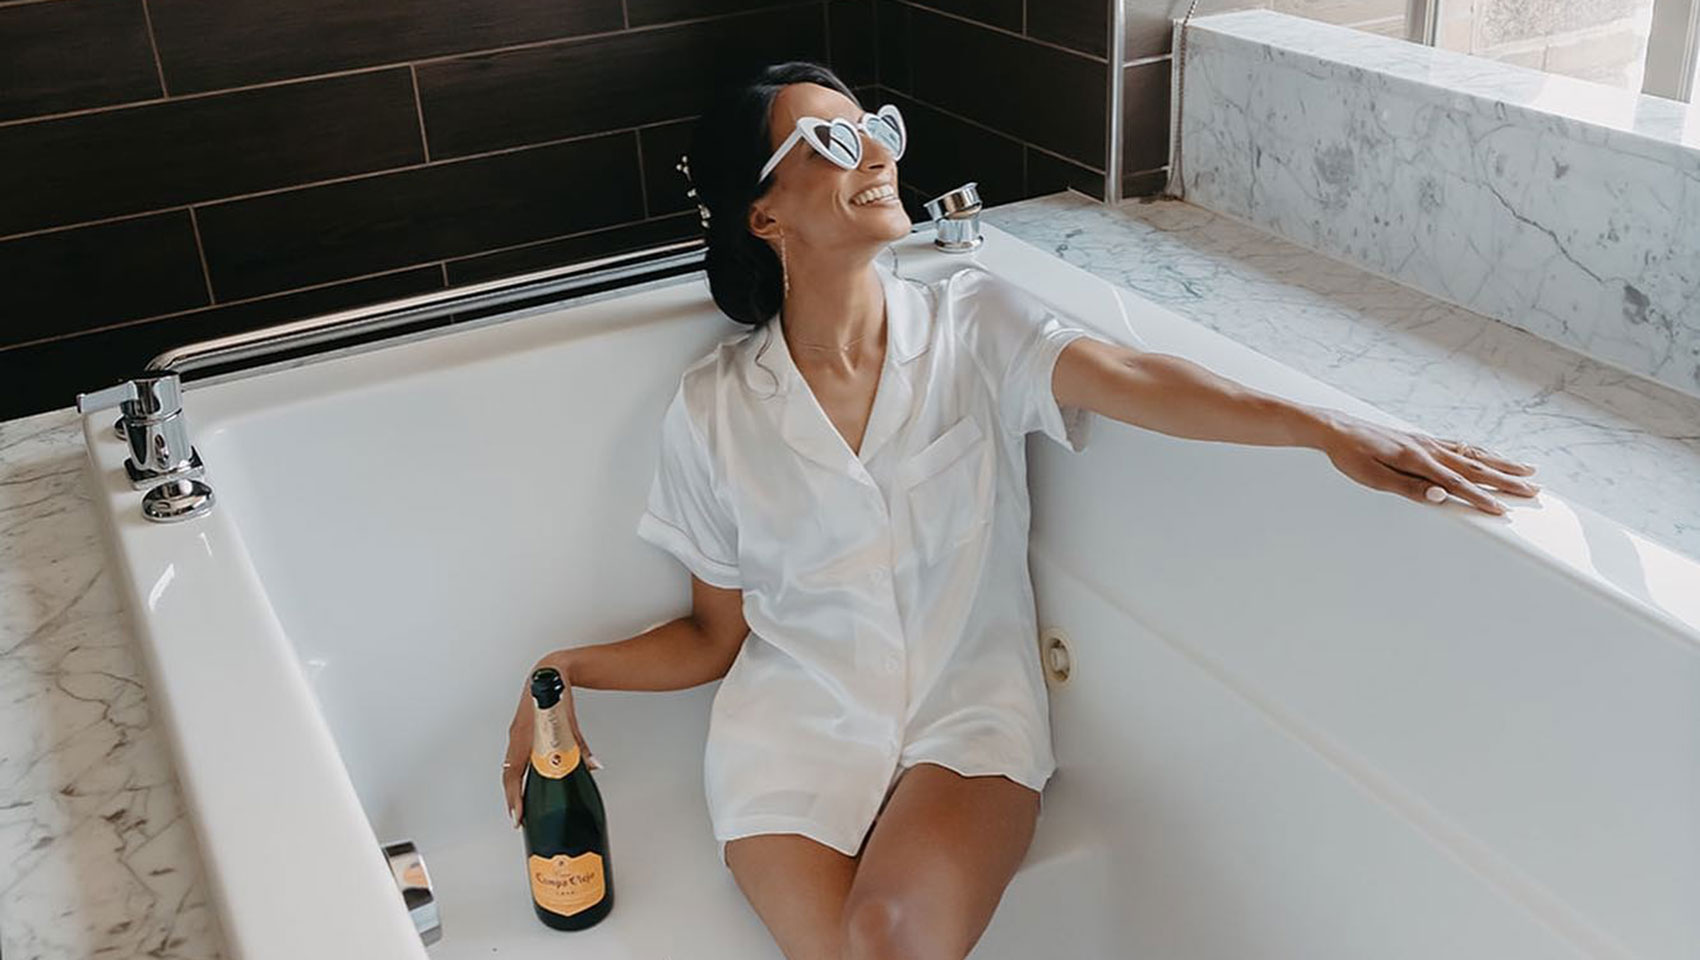 woman with sunglasses dressed in white, sitting in a spa bathtub and holding a bottle of champagne